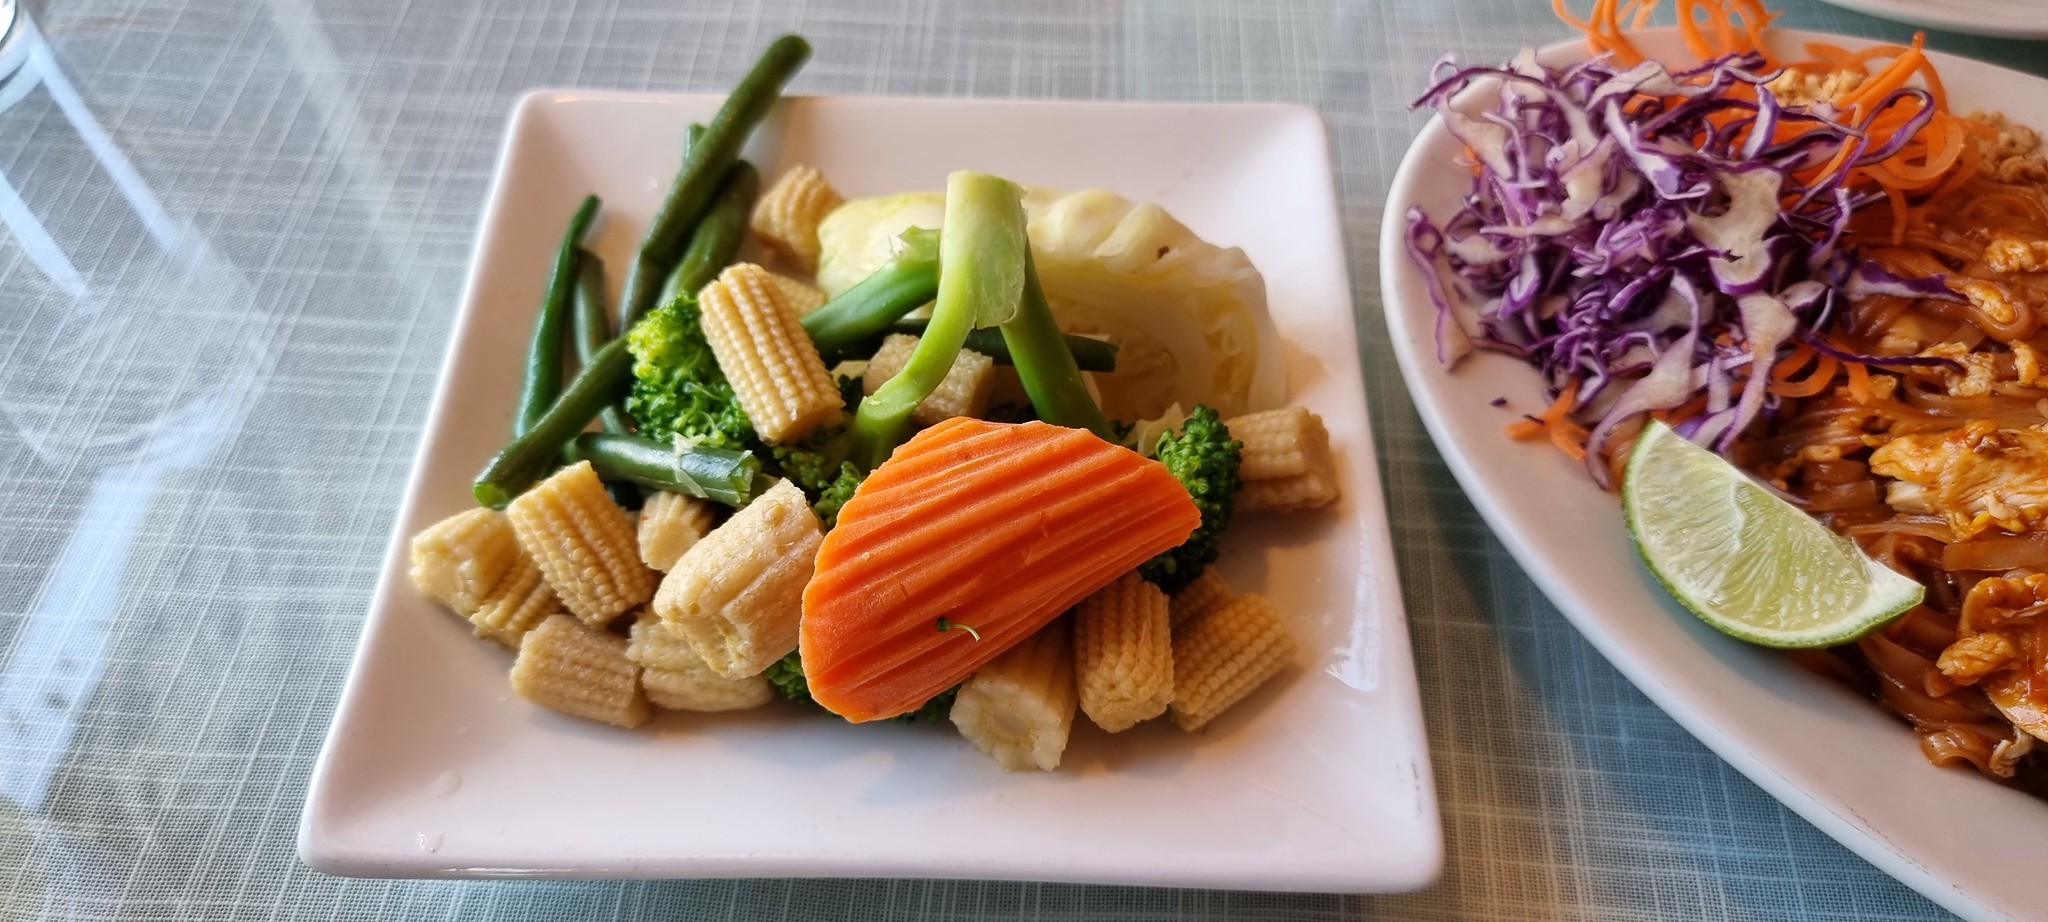 A plate of vegetables which were not that inspiring